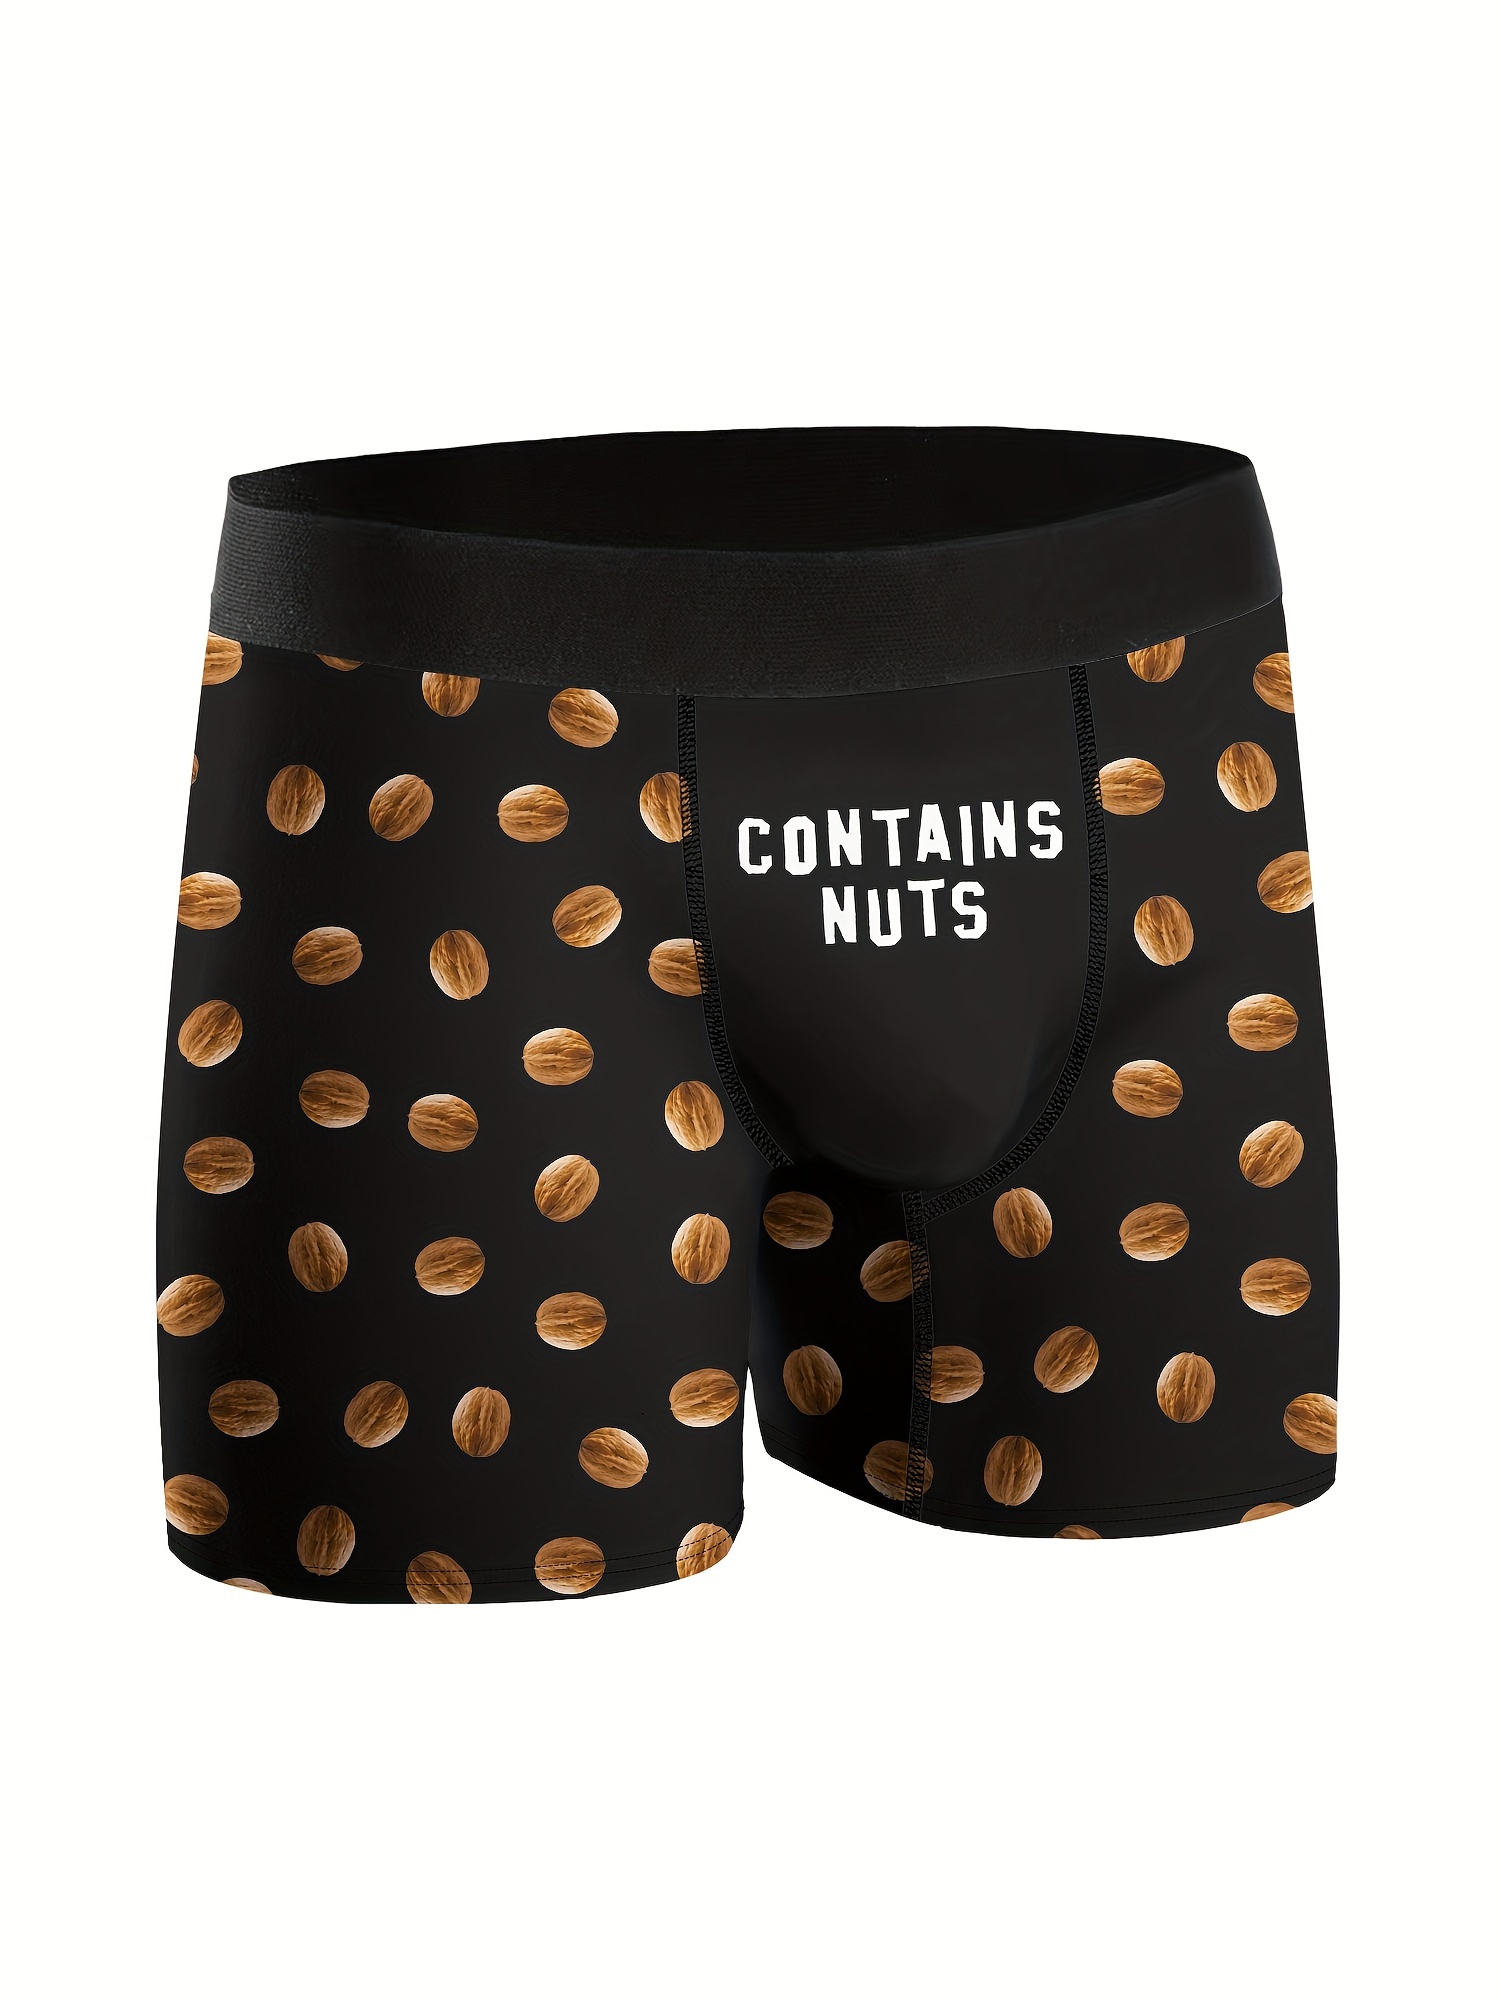 contains nuts print mens fashion novelty boxer briefs shorts breathable comfy high stretch boxer trunks mens underwear details 5